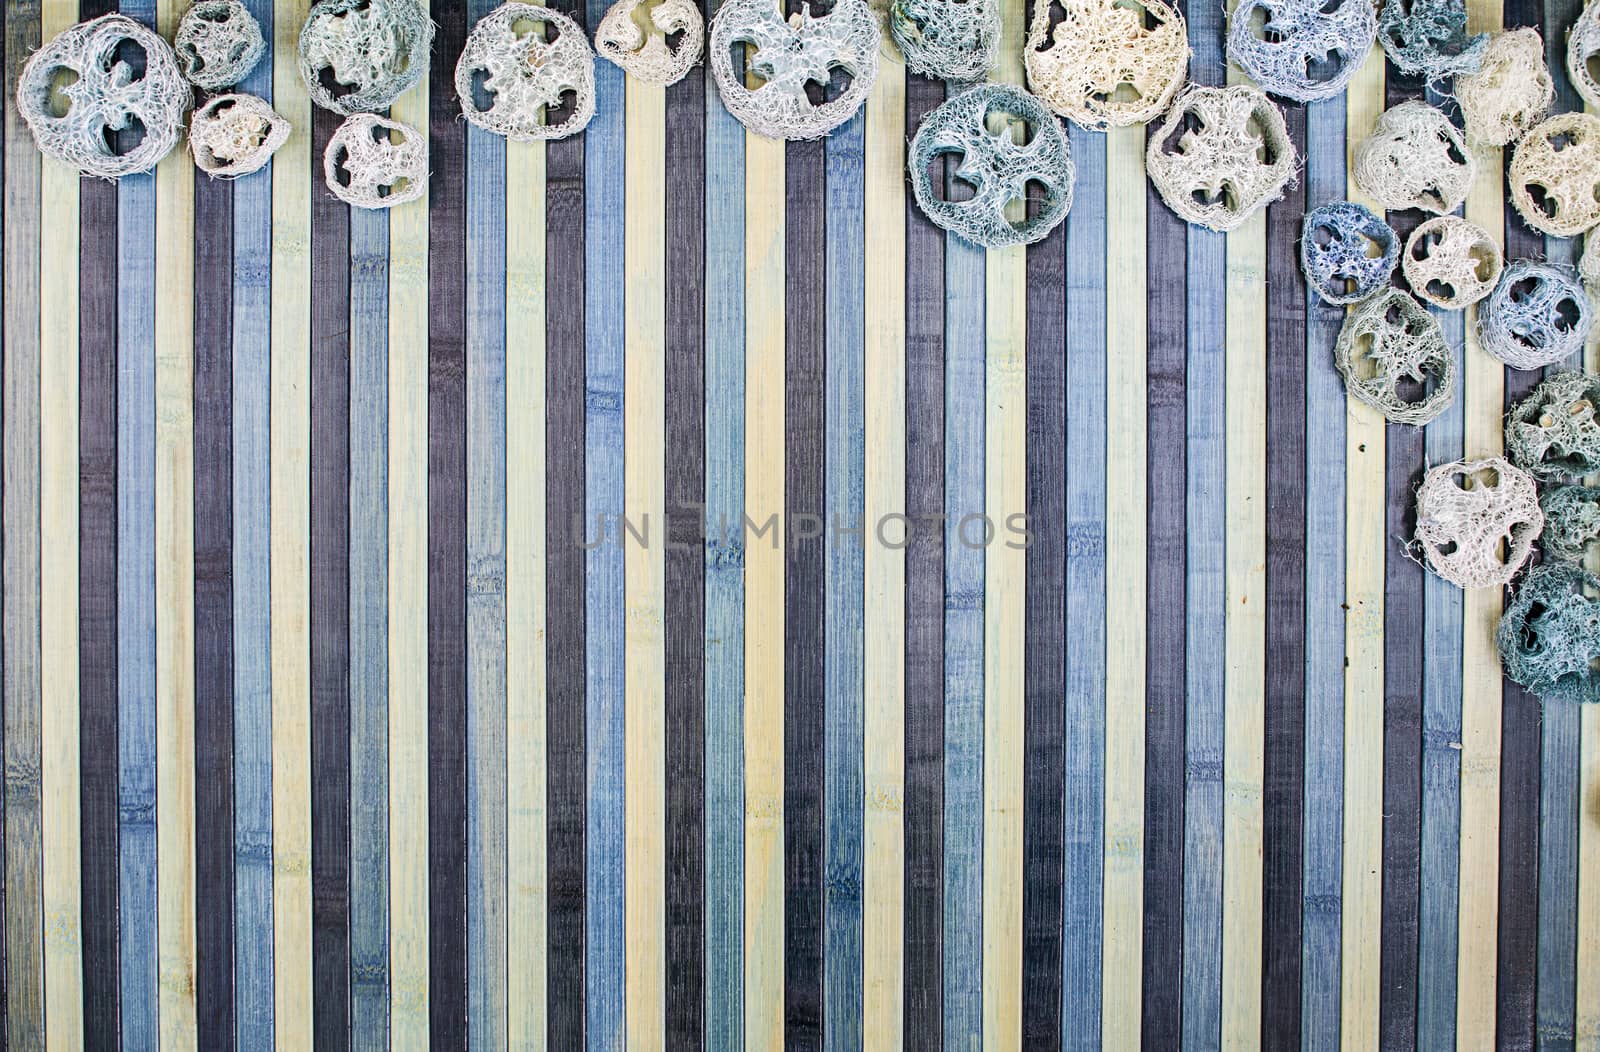 Background composition on wood in shades of light blue and blue with a matching potpourri contour